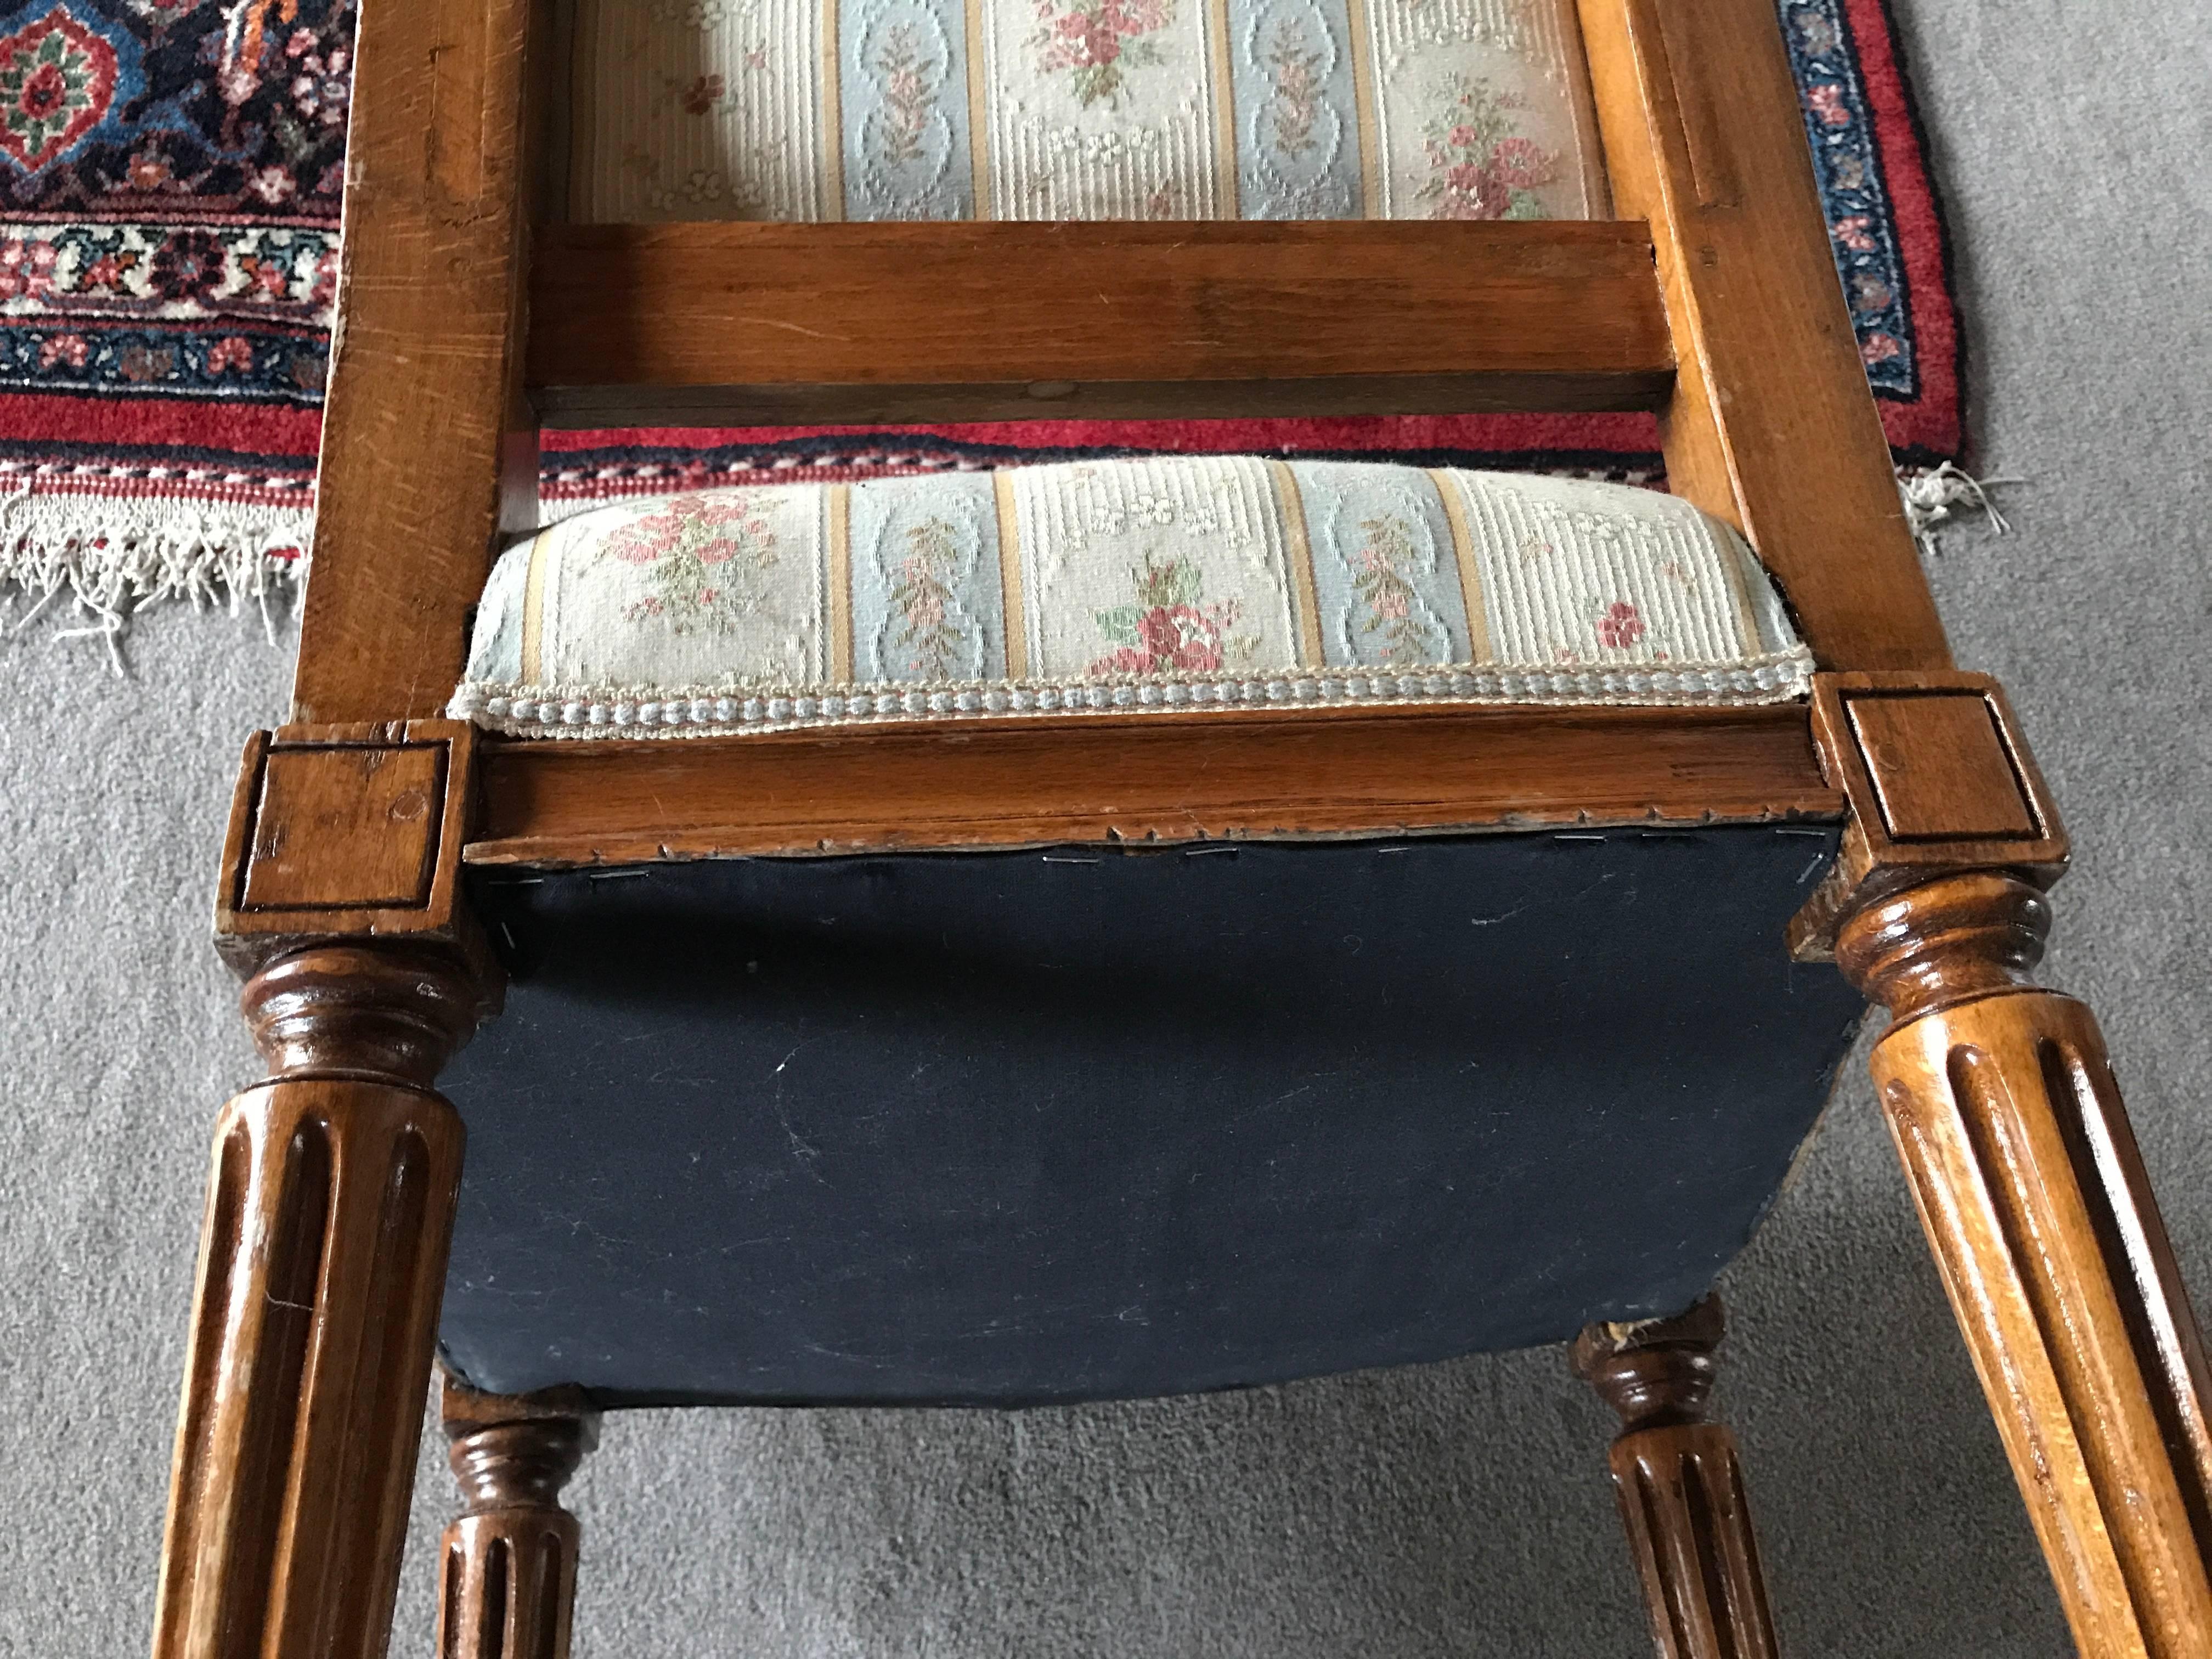 18th century set of six original Louis XVI chairs, carved oak. In original, unrestored condition. The chairs will be shipped from Germany. Shipping costs to Boston are included.